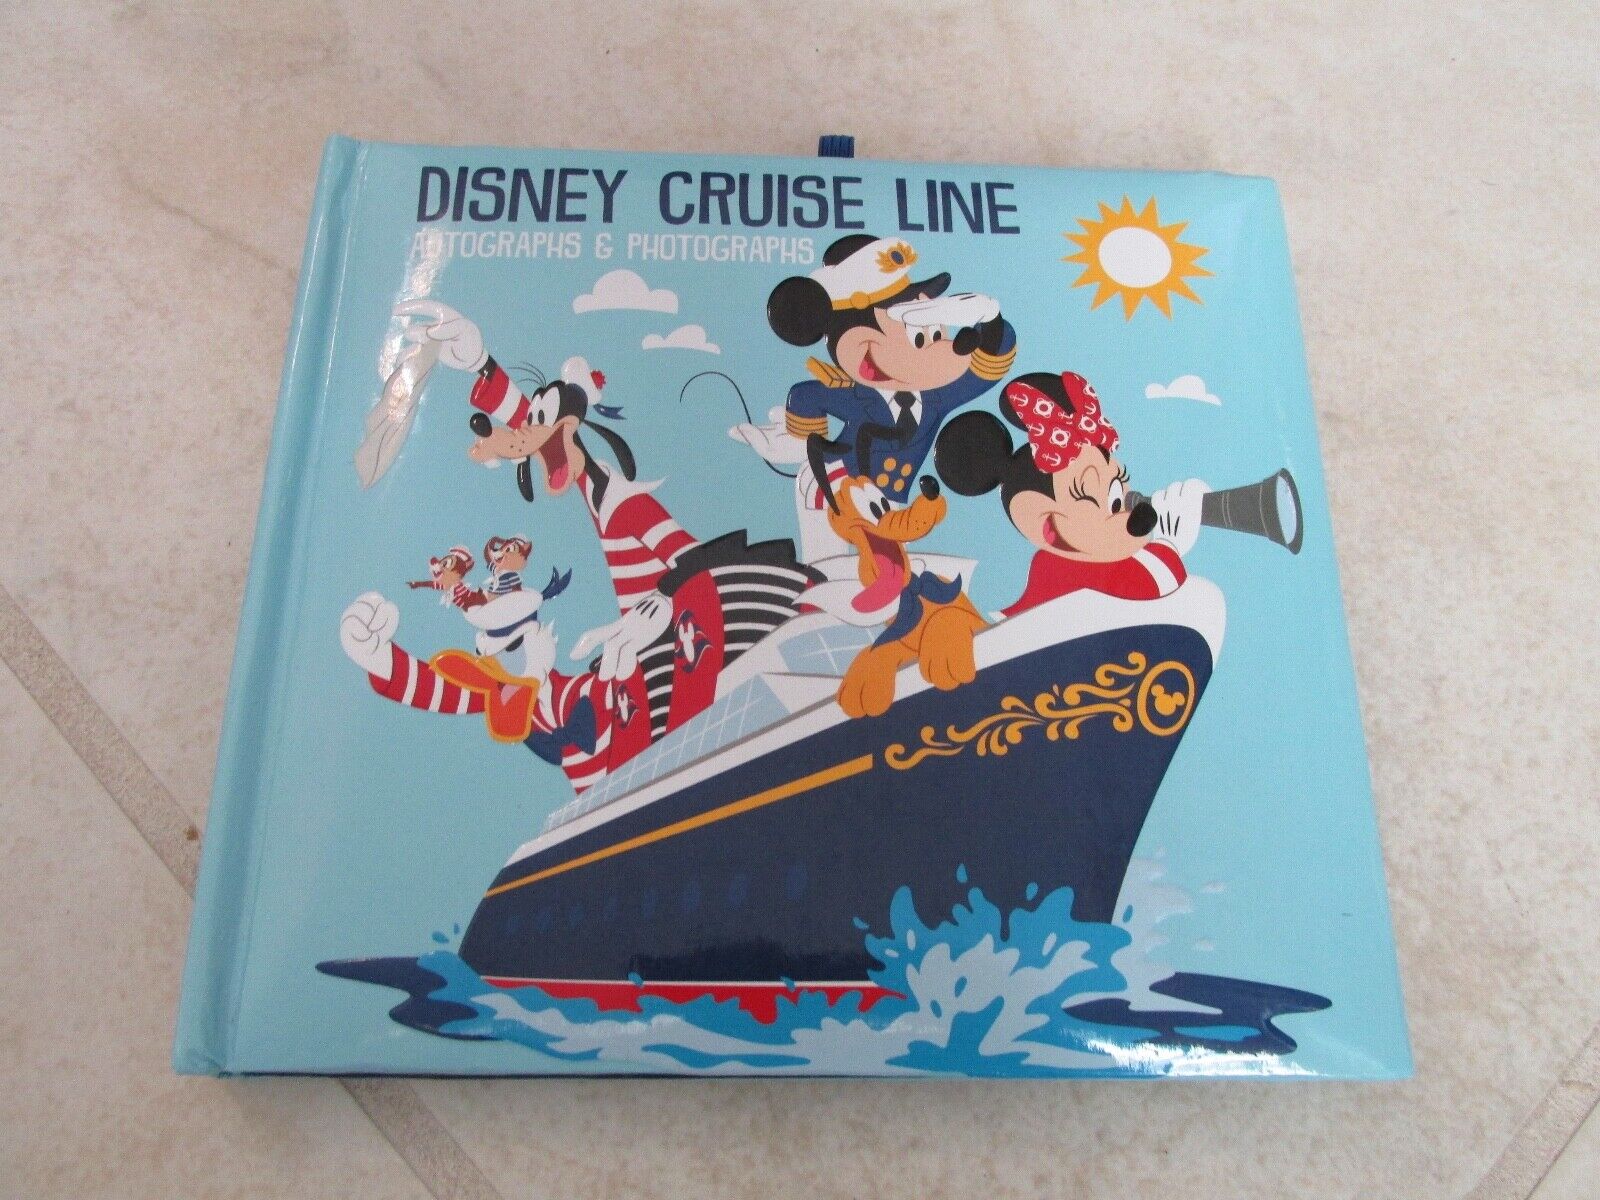 Disney Cruise Line DCL Autographs & Photographs Book with 4 Signatures